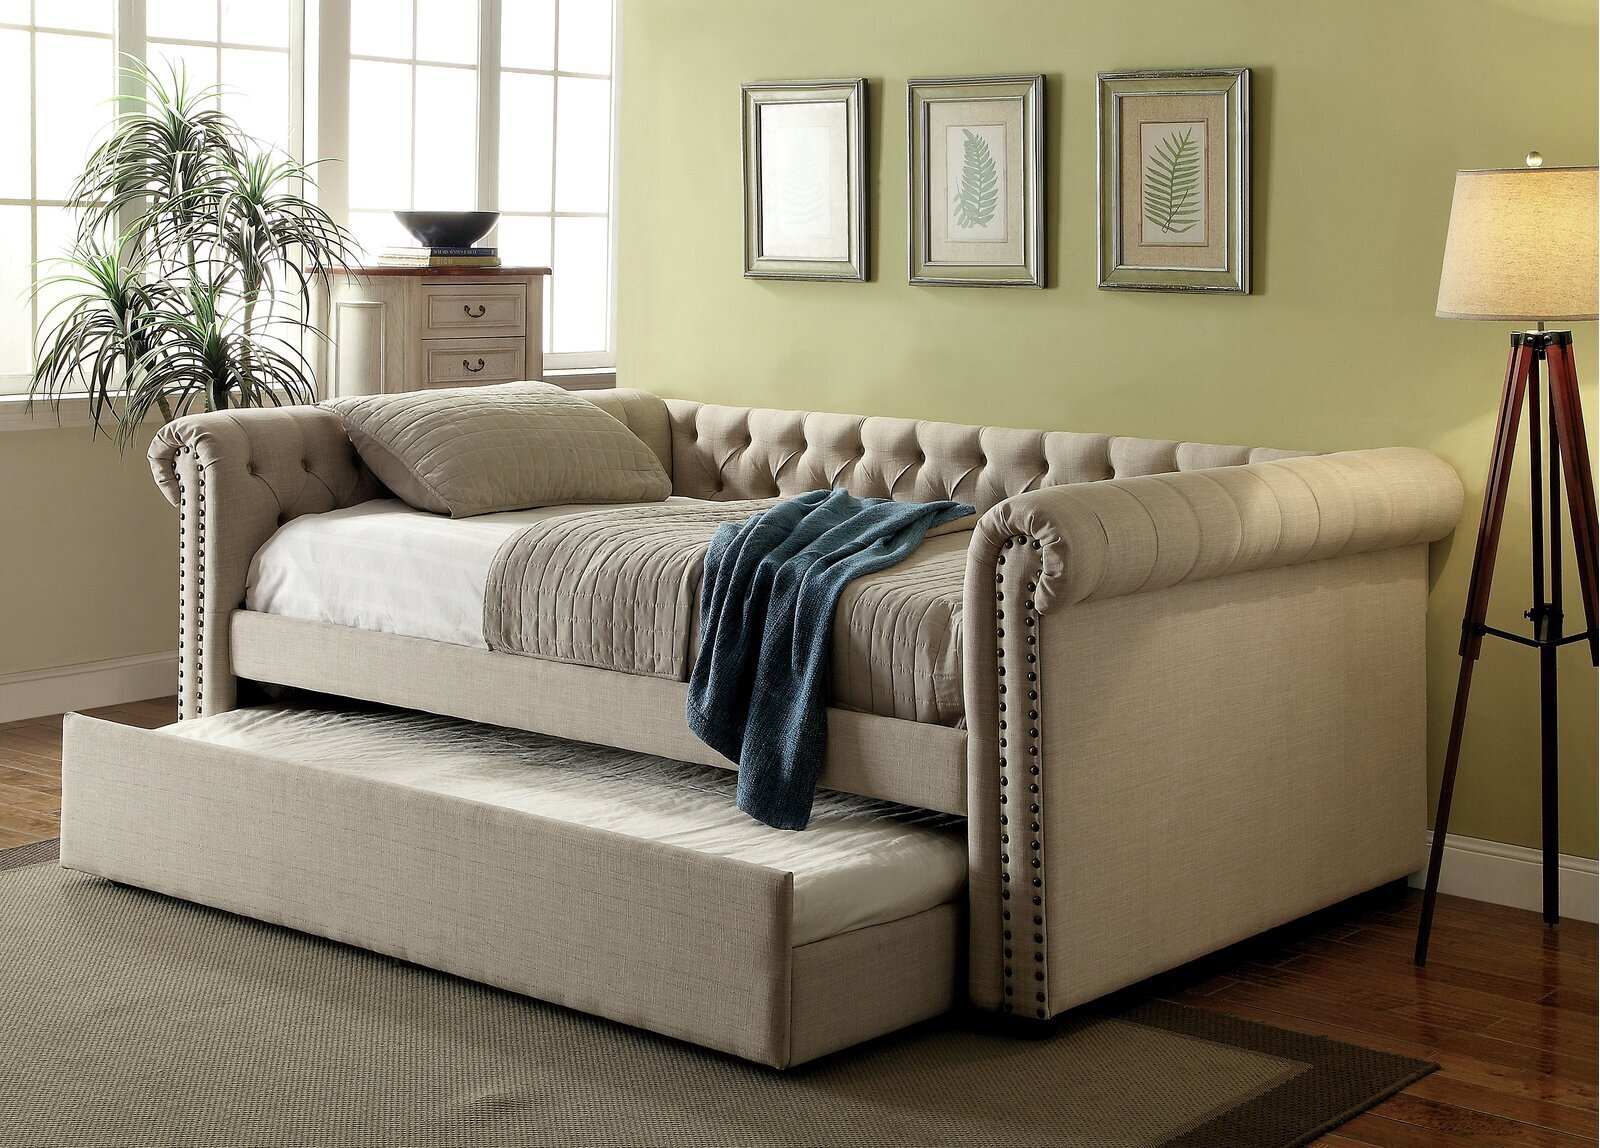 Sofa Daybed Converts to Queen